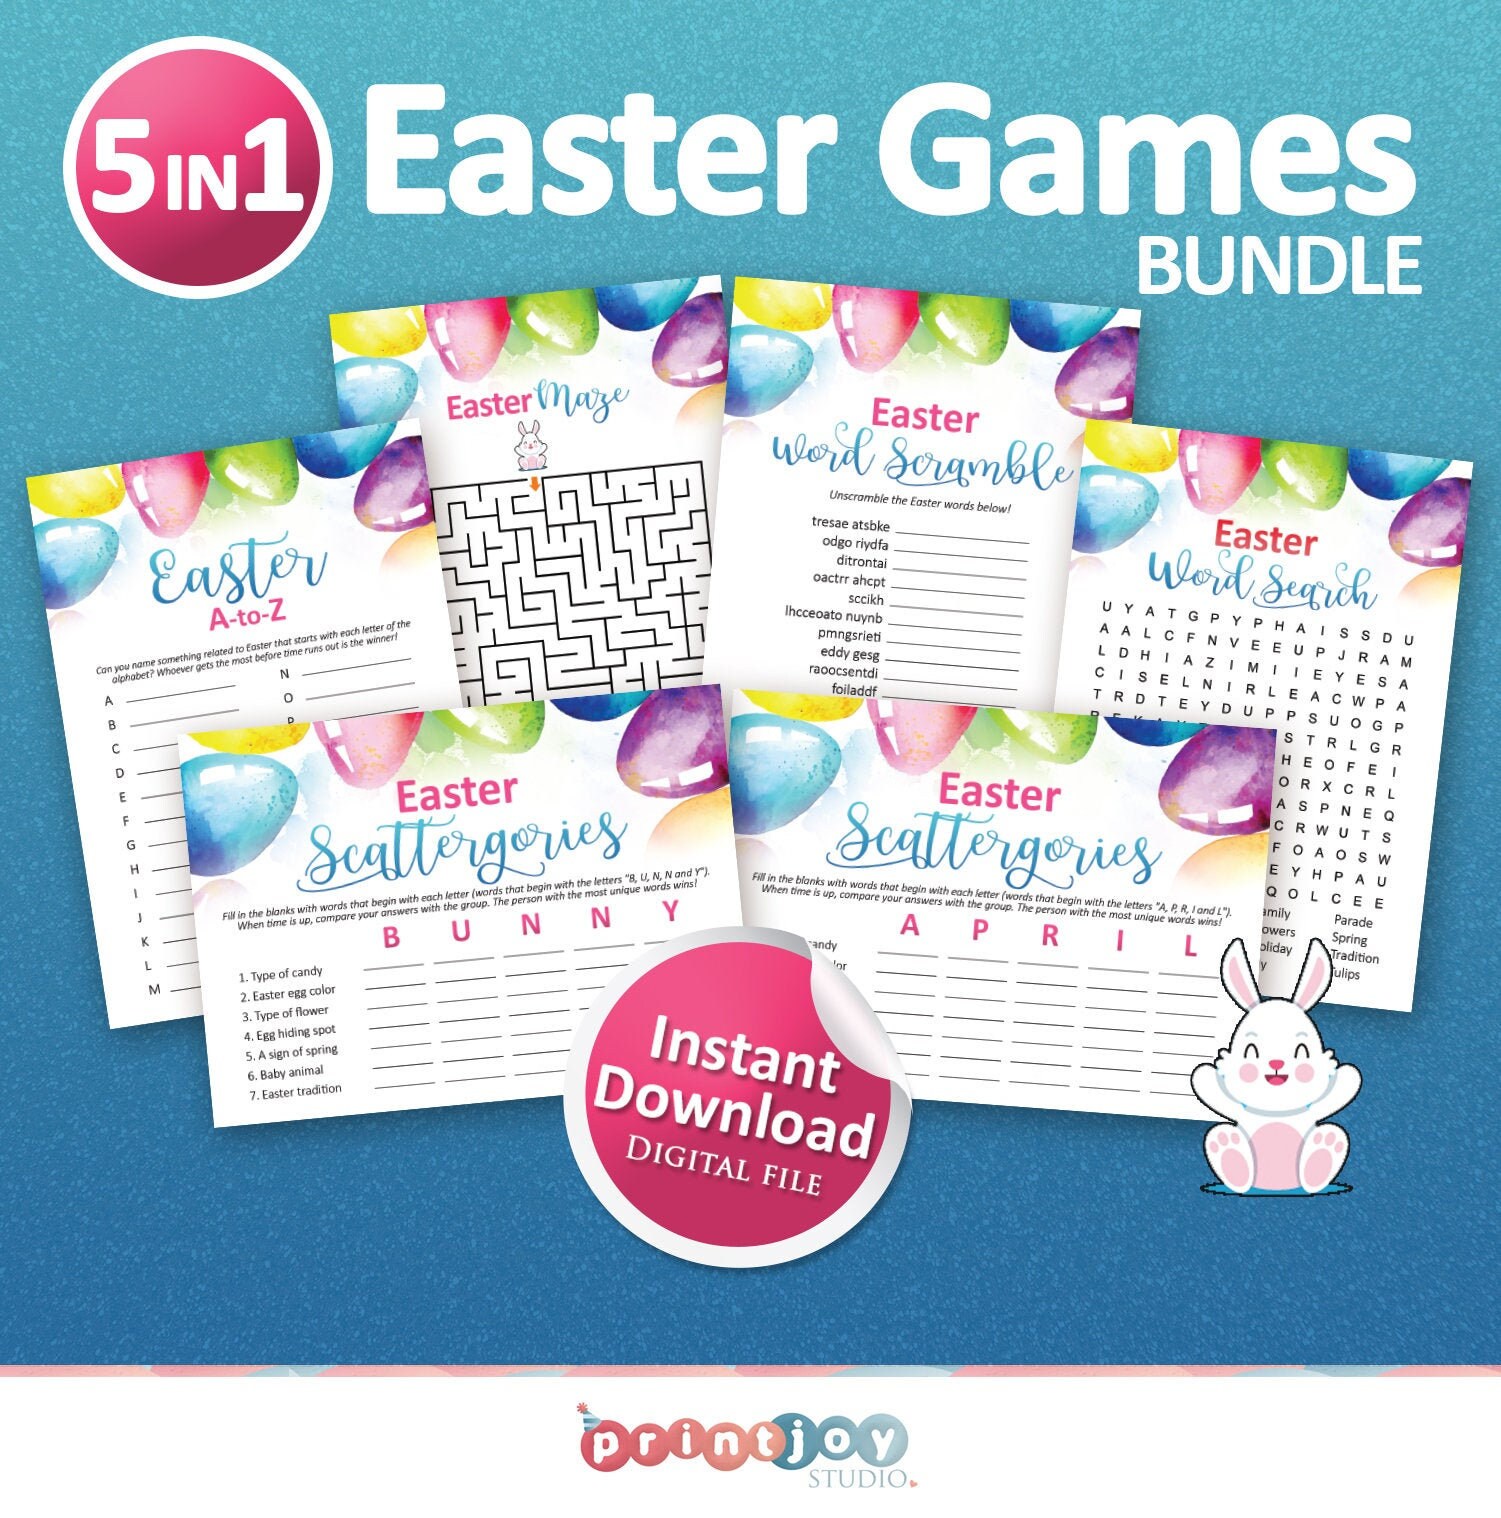 Easter Games Bundle, Easter Printables, Family Games, Easter Print,  Printable Games, Adult Games, Kids Games, Games for Adults 